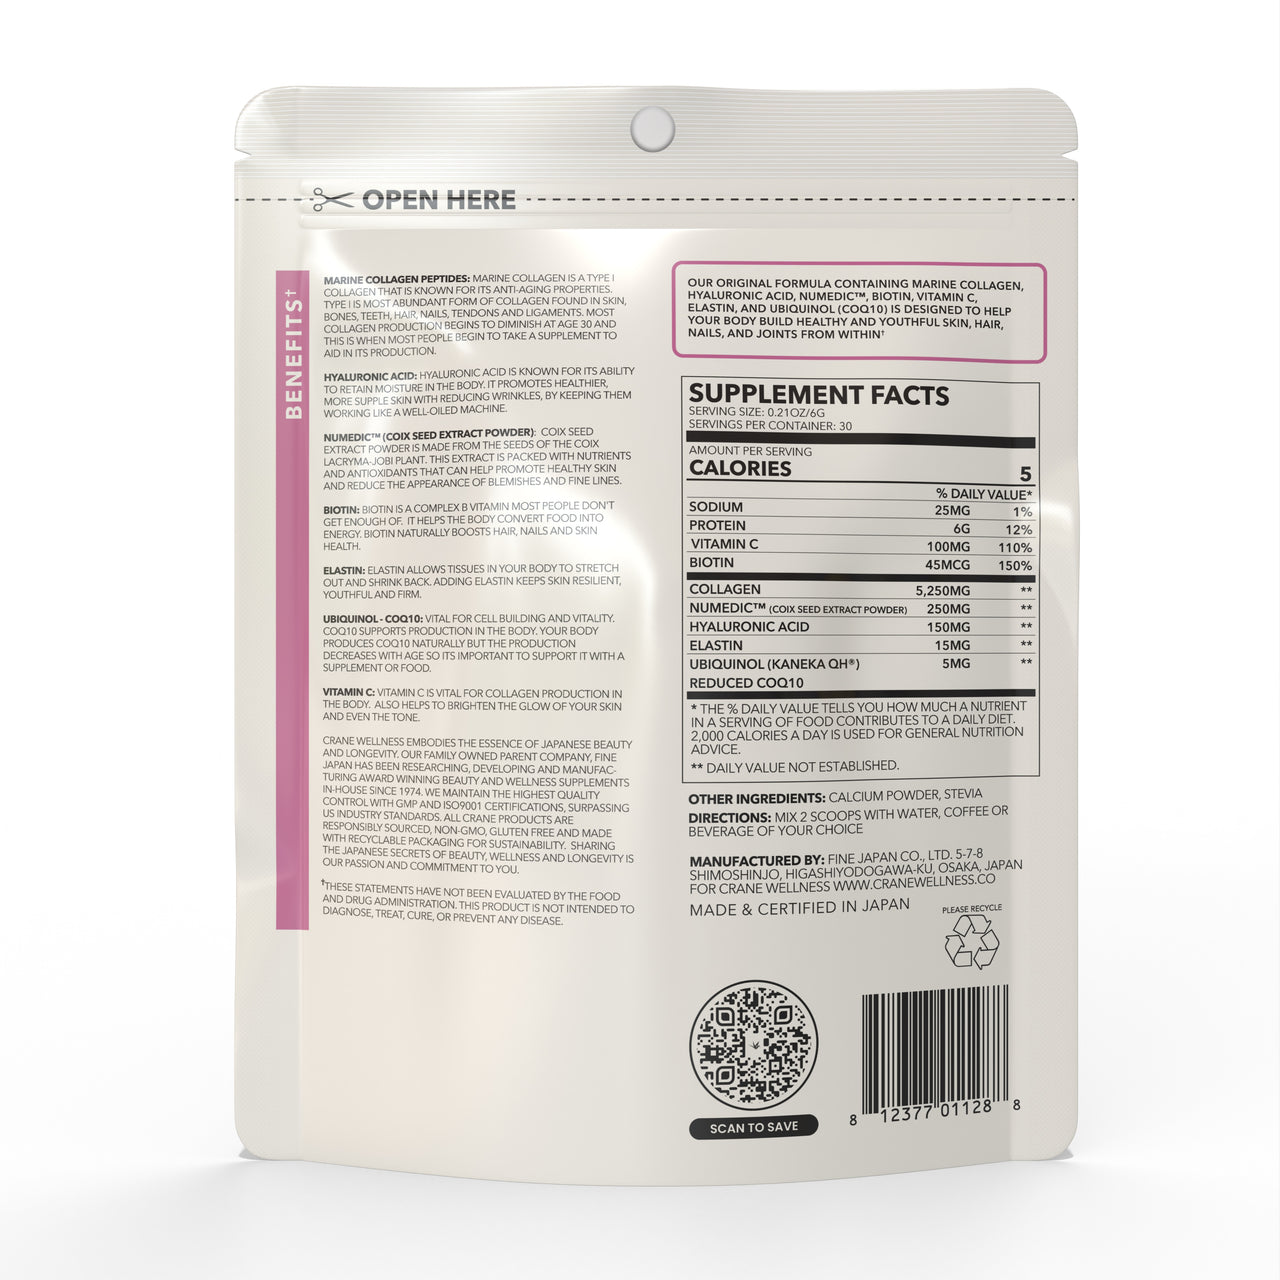  Radiant Renew Collagen Hydration Complex powder back of bag with details about the benefits of ingredients (marine collagen peptides, hyaluronic acid, coix seed extract powder, biotin, elastin, coQ10, and vitamin c) and the supplement facts and directions for use. Made and certified in Japan.